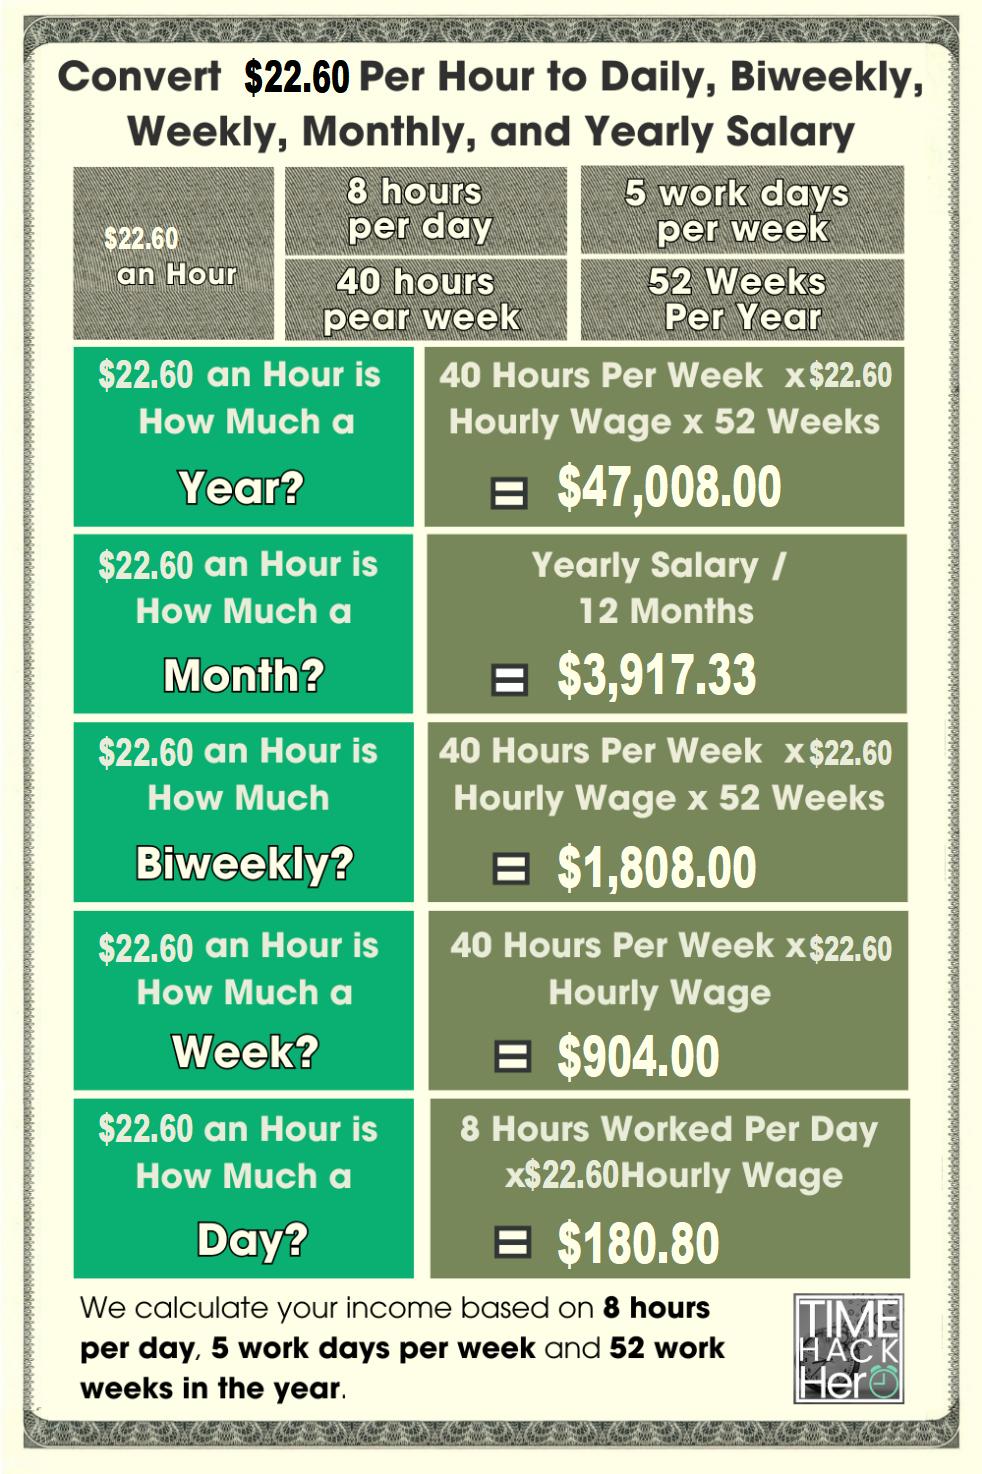 Convert $22.60 Per Hour to Weekly, Monthly, and Yearly Salary